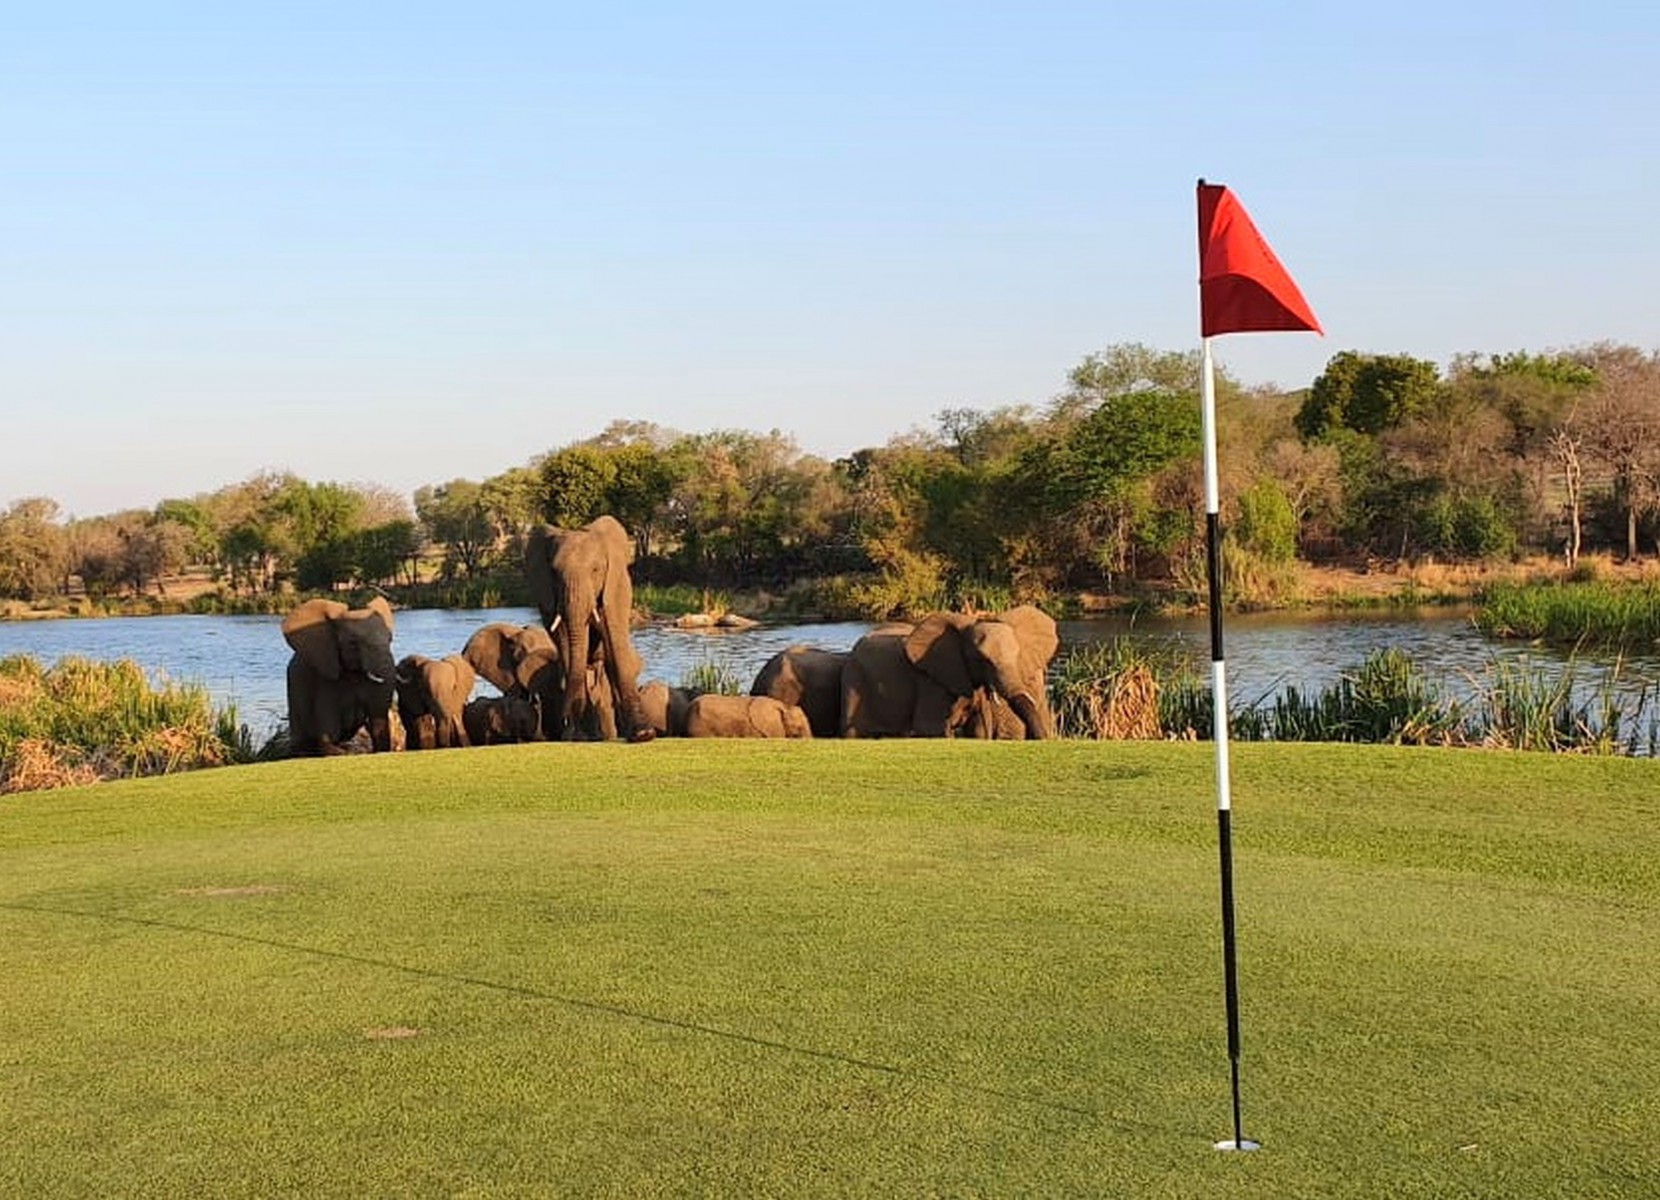 , Around the worlds wildest golf course where hyenas eat baboons and lions prowl the fairways